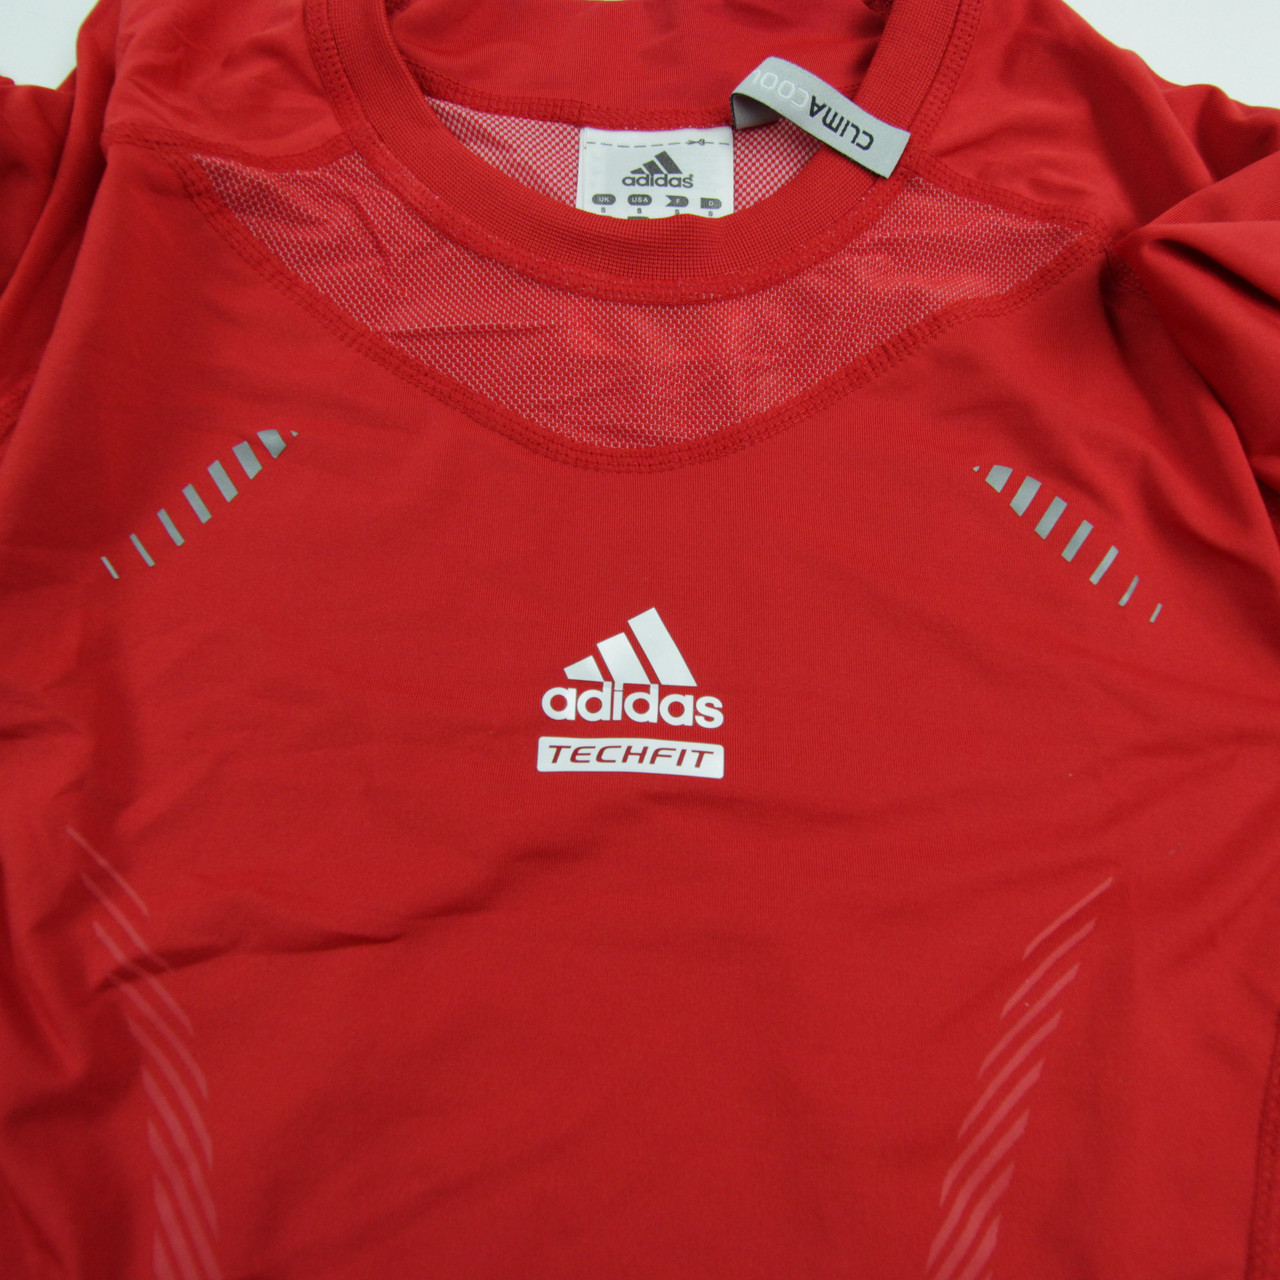 adidas Techfit Compression Top Men's Red Used S 30